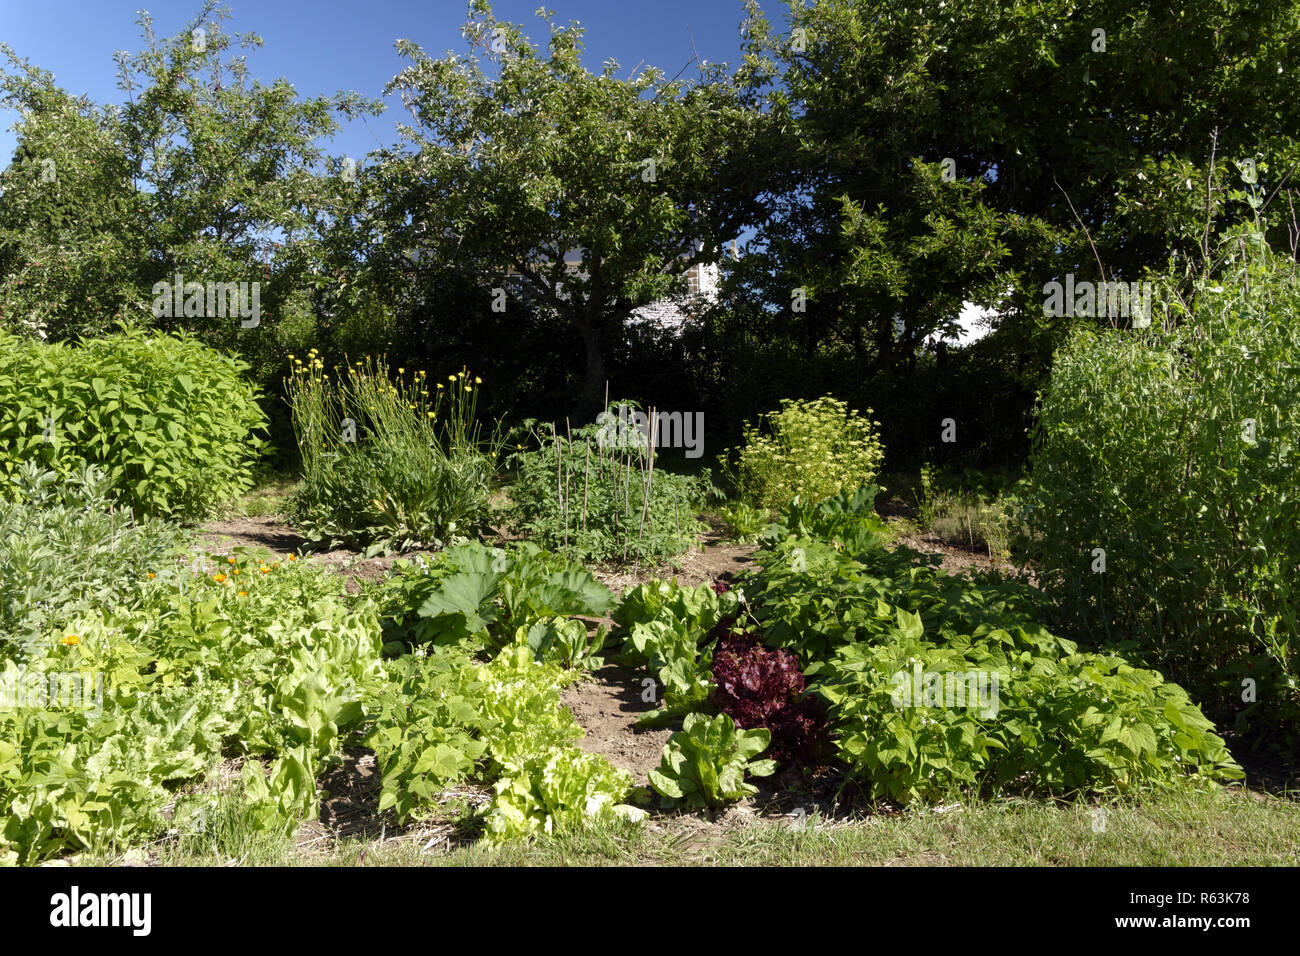 Vegetables growing in the garden (broad beans, salads, green beans, peas supported by canes, plants of tomatoes, parsley, Zucchini plants). Stock Photo